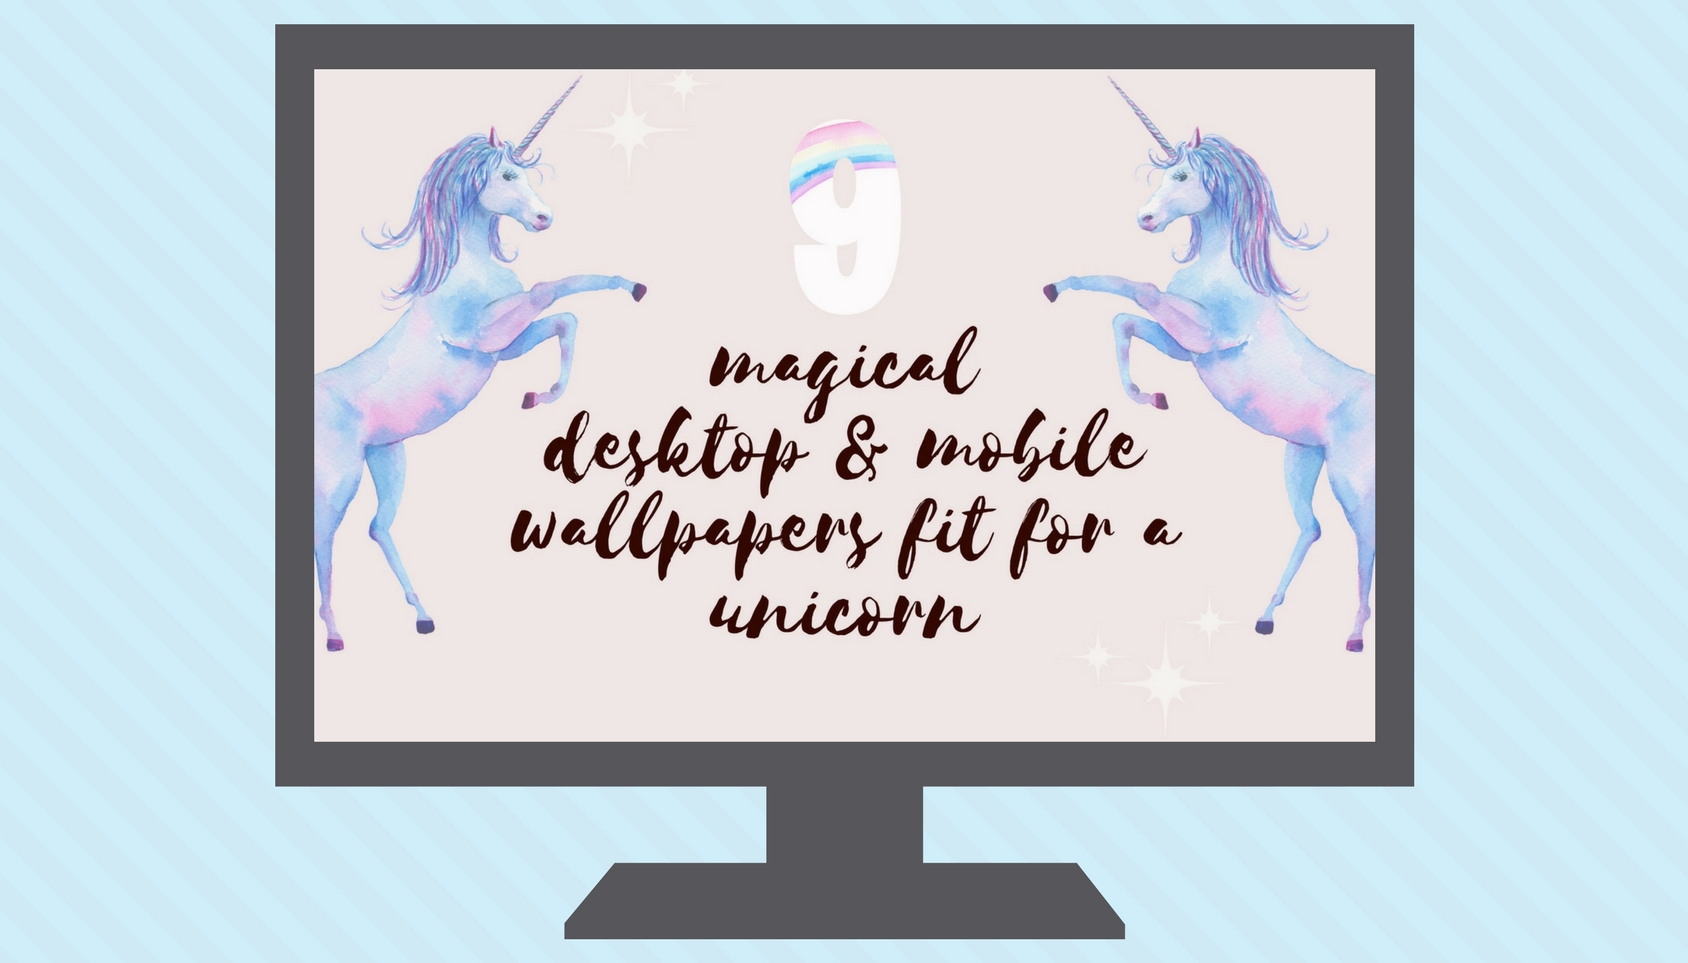 9 Magical Desktop Mobile Wallpapers Fit For A Unicorn Off The Cusp